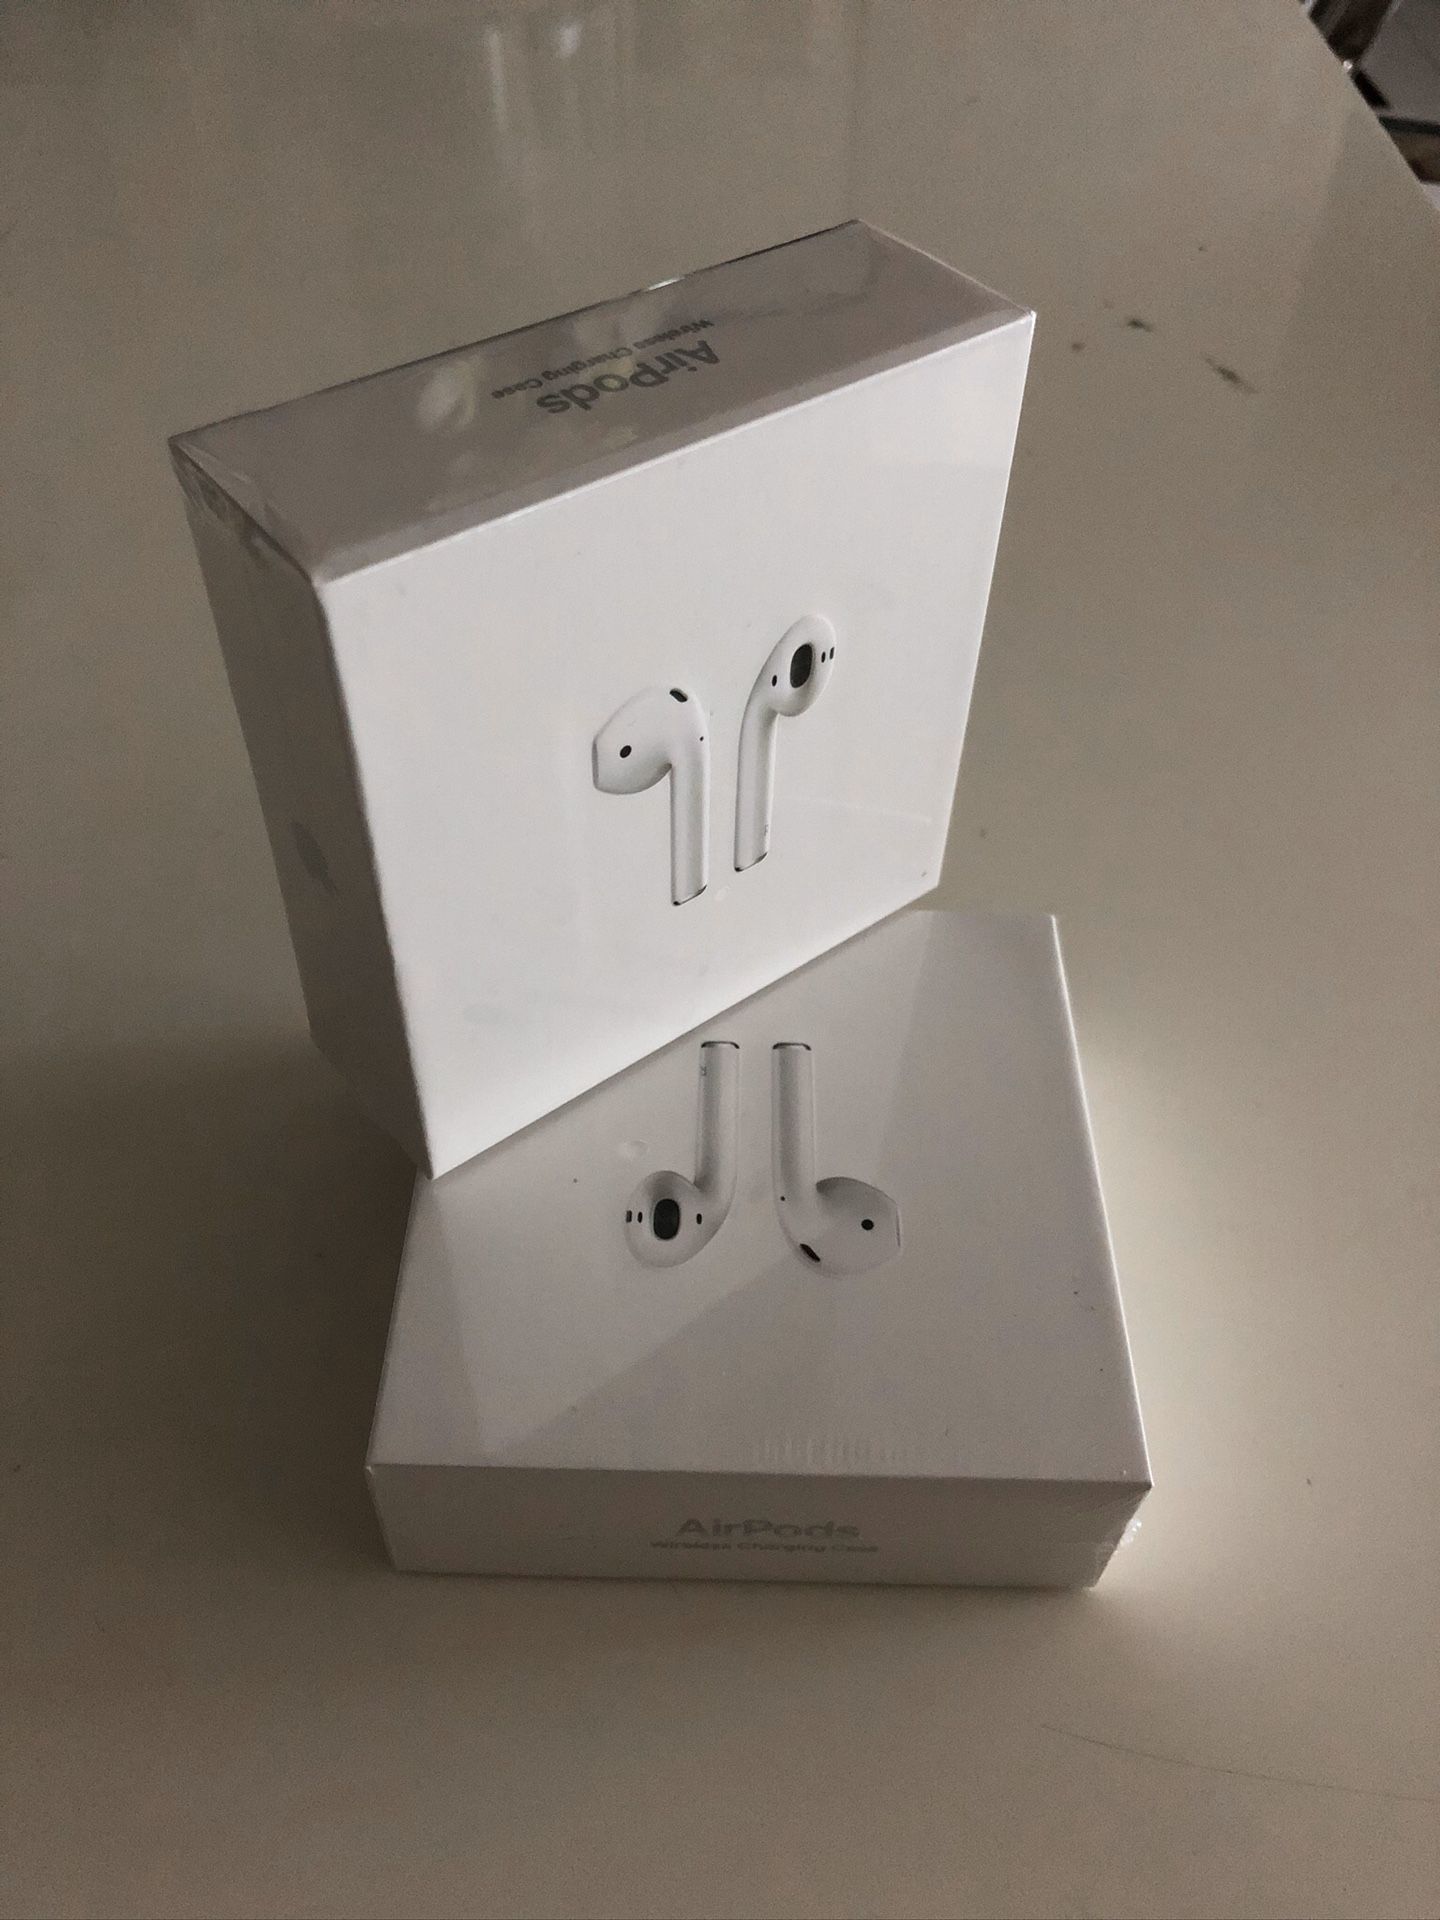 Super Copy of AirPods 2nd Generation Wireless charging Case